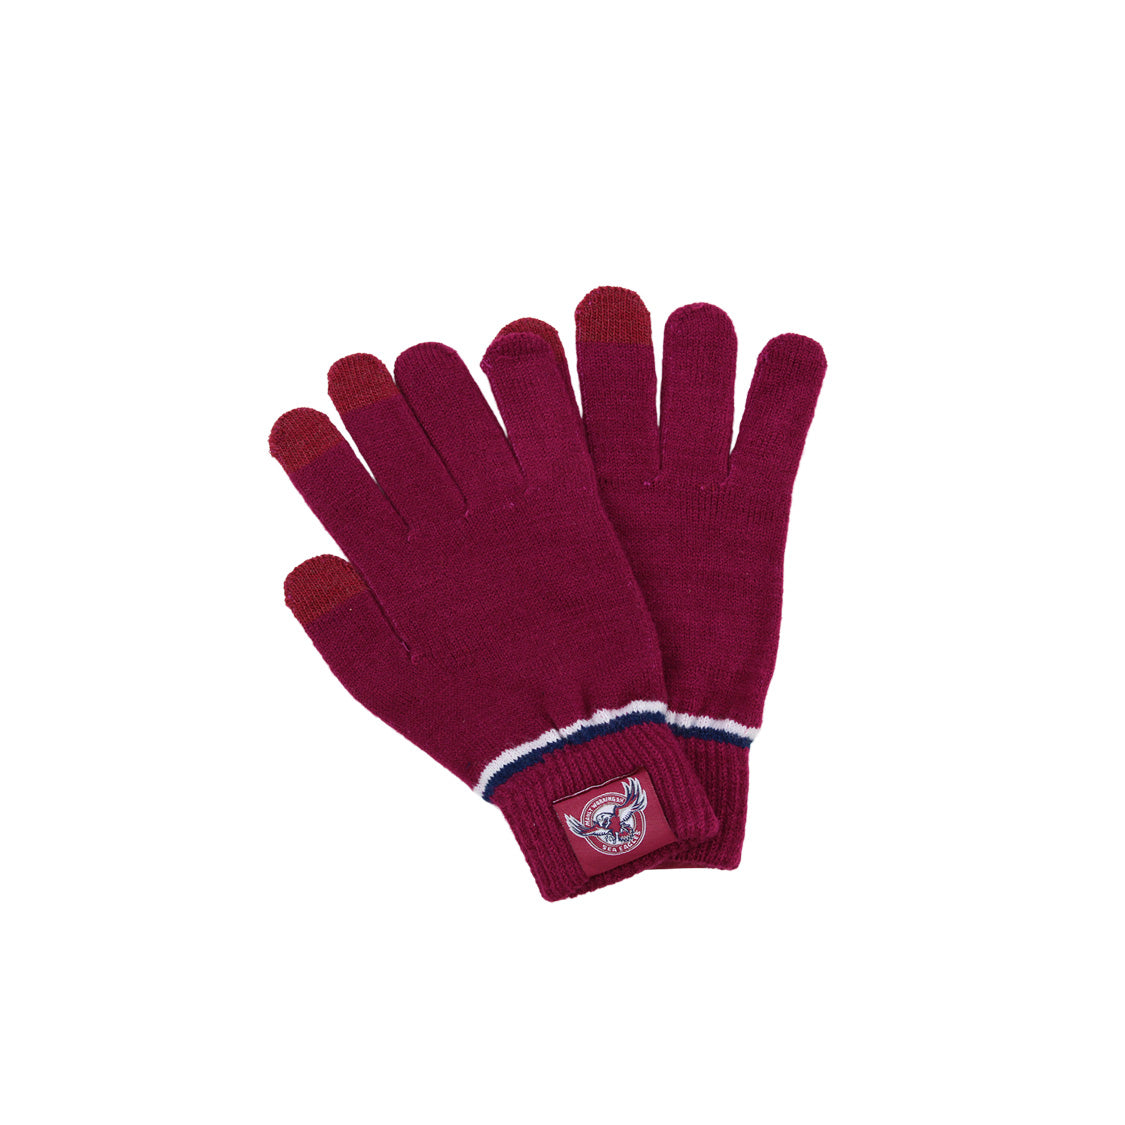 MANLY SEA EAGLES NRL TOUCHCREEN GLOVES_MANLY SEA EAGLES_STUBBY CLUB